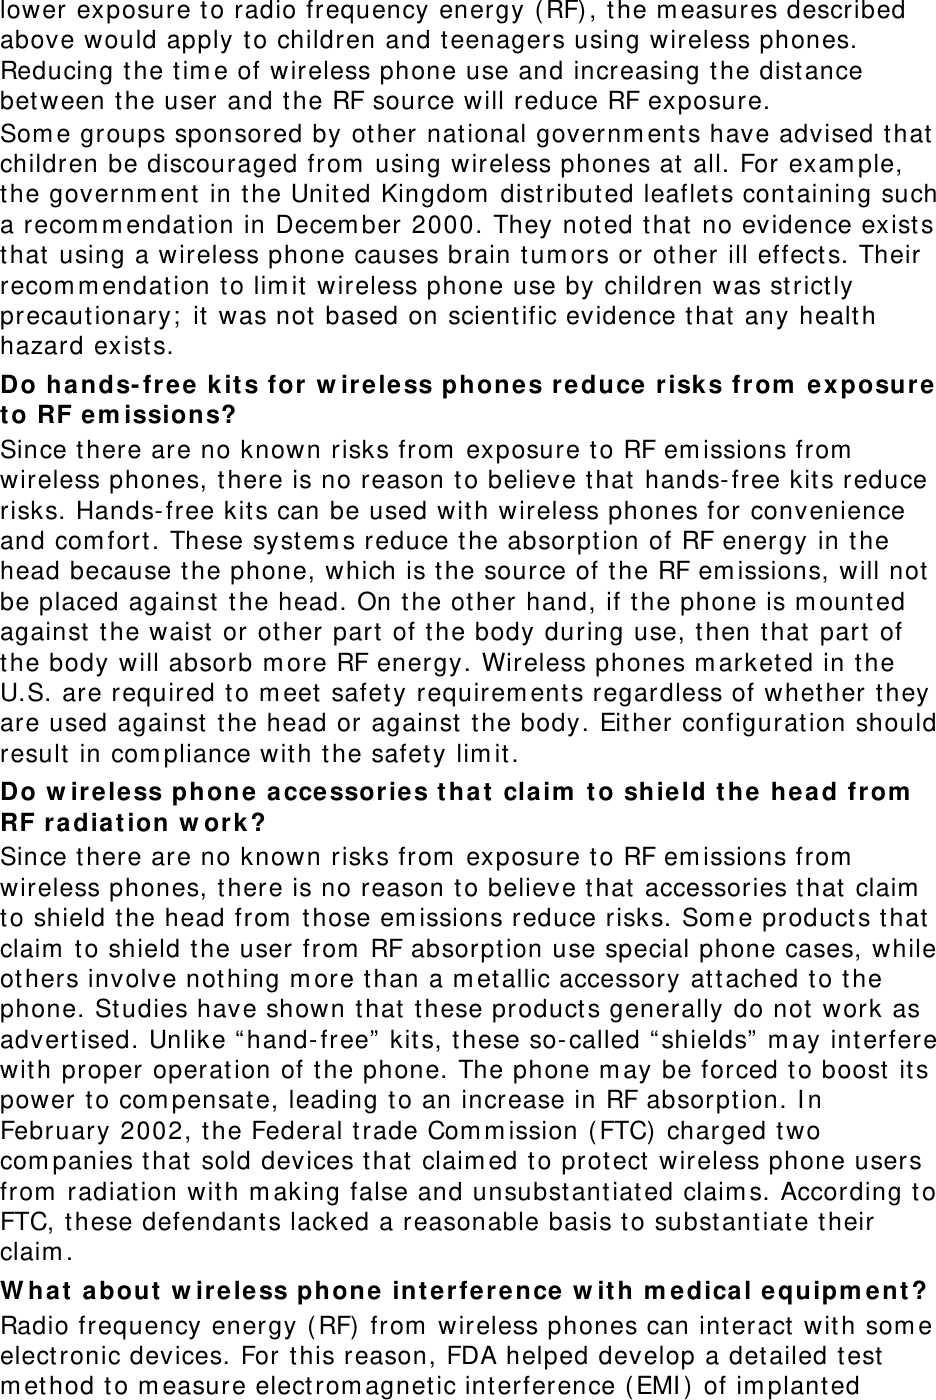 lower exposure t o radio frequency energy ( RF) , t he m easures described above would apply to children and t eenagers using wireless phones. Reducing t he t im e of wireless phone use and increasing t he dist ance bet ween t he user and t he RF source will reduce RF exposure. Som e groups sponsored by ot her nat ional governm ent s have advised t hat  children be discouraged from  using wireless phones at  all. For exam ple, the governm ent in t he Unit ed Kingdom  dist ribut ed leaflet s cont aining such a recom m endat ion in Decem ber 2000. They not ed t hat  no evidence exist s that  using a wireless phone causes brain t um ors or ot her ill effect s. Their recom m endat ion to lim it wireless phone use by children was st rict ly precaut ionary;  it  was not  based on scientific evidence t hat  any healt h hazard exist s.   Do hands- fr e e  k it s for w ireless phone s reduce risk s from  ex posure t o RF em issions? Since t here are no known risks from  exposure t o RF em issions from  wireless phones, there is no reason t o believe t hat hands- free kit s reduce risks. Hands- free kits can be used with wireless phones for convenience and com fort. These syst em s reduce t he absorpt ion of RF energy in t he head because t he phone, which is t he source of the RF em issions, will not  be placed against  t he head. On t he ot her hand, if t he phone is m ounted against  the waist  or ot her part of t he body during use, then t hat  part of the body will absorb m ore RF energy. Wireless phones m arketed in t he U.S. are required to m eet  safet y requirem ents regardless of whether they are used against  the head or against  t he body. Eit her configurat ion should result  in com pliance with the safety lim it . Do w ireless phone  a cce ssories t hat  claim  t o shield t he hea d from  RF radiat ion w ork ? Since t here are no known risks from  exposure t o RF em issions from  wireless phones, there is no reason t o believe t hat accessories that  claim  to shield the head from  t hose em issions reduce risks. Som e product s that claim  to shield t he user from  RF absorpt ion use special phone cases, while ot hers involve nothing m ore t han a m et allic accessory at t ached t o t he phone. Studies have shown t hat  t hese product s generally do not work as advertised. Unlike “hand- free”  kit s, these so- called “ shields”  m ay int erfere wit h proper operat ion of t he phone. The phone m ay be forced to boost  it s power to com pensat e, leading t o an increase in RF absorpt ion. I n February 2002, t he Federal t rade Com m ission ( FTC)  charged t wo com panies t hat  sold devices t hat  claim ed t o prot ect  wireless phone users from  radiation wit h m aking false and unsubstant iat ed claim s. According t o FTC, t hese defendant s lacked a reasonable basis t o subst antiate t heir claim . W hat a bout  w irele ss phone int e r ference  w it h m edica l equipm ent? Radio frequency energy ( RF) from  wireless phones can int eract wit h som e elect ronic devices. For this reason, FDA helped develop a det ailed test  m ethod to m easure elect rom agnet ic int erference ( EMI )  of im plant ed 